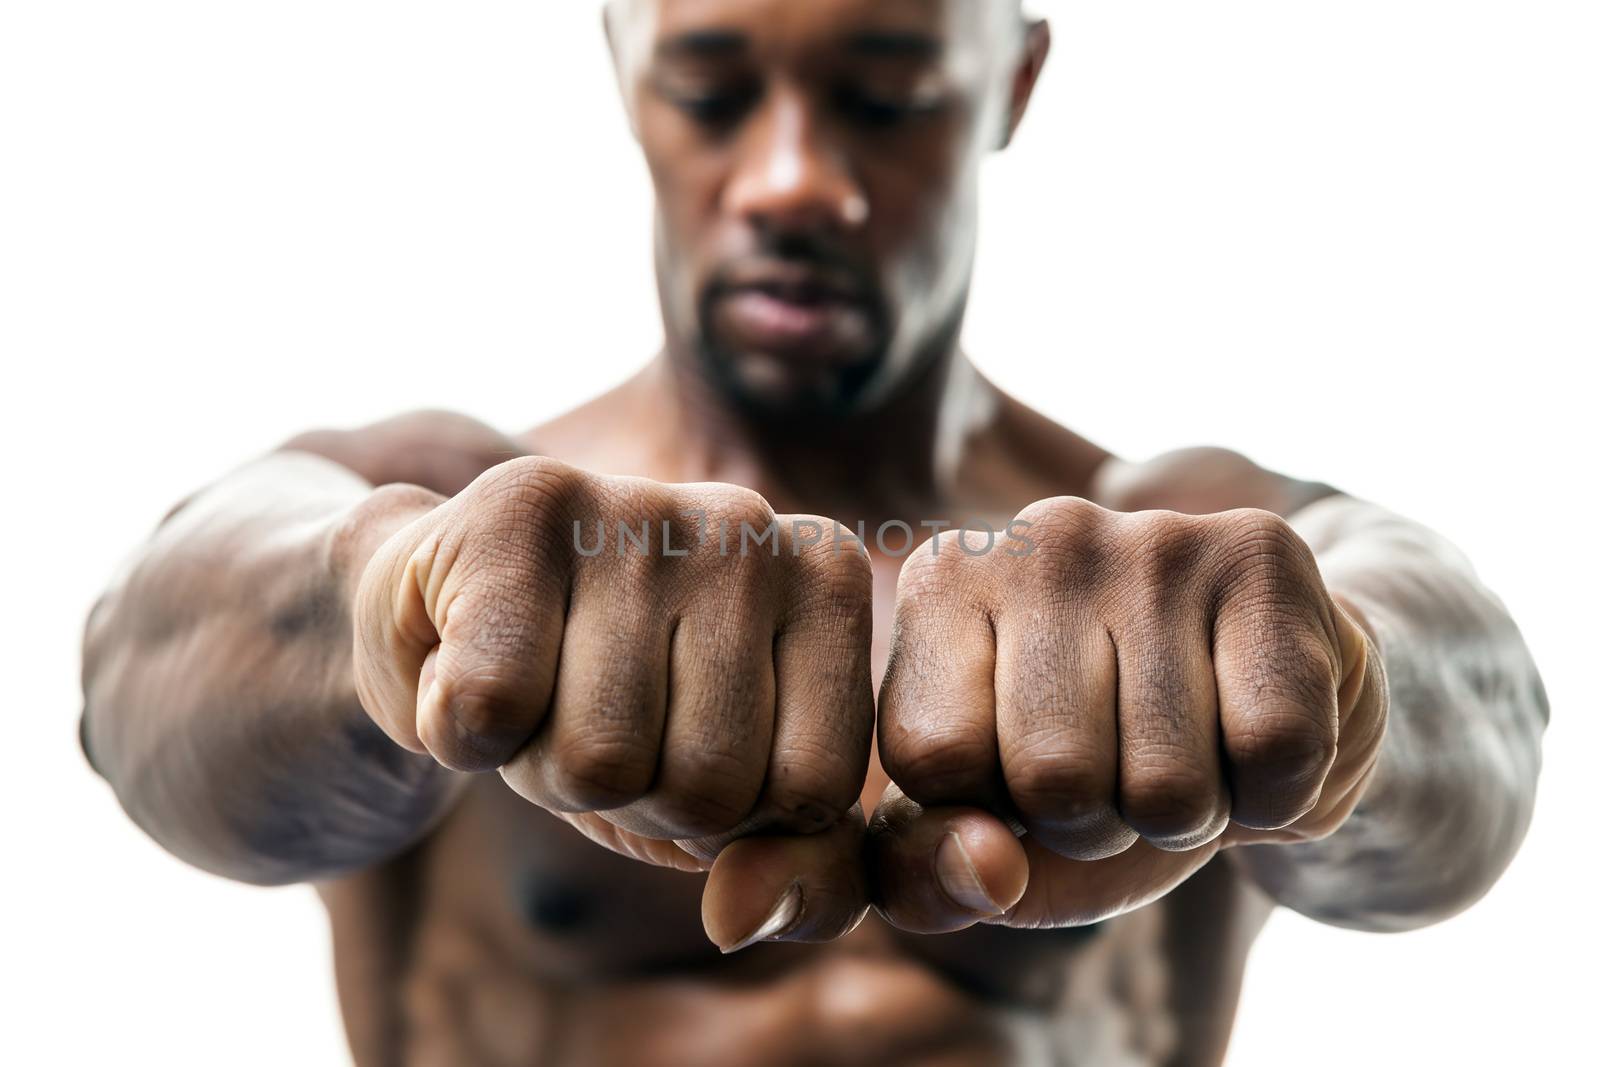 Muscular man of African descent isolated over a white background showing a closeup of his fists and knuckles.  Shallow depth of field.